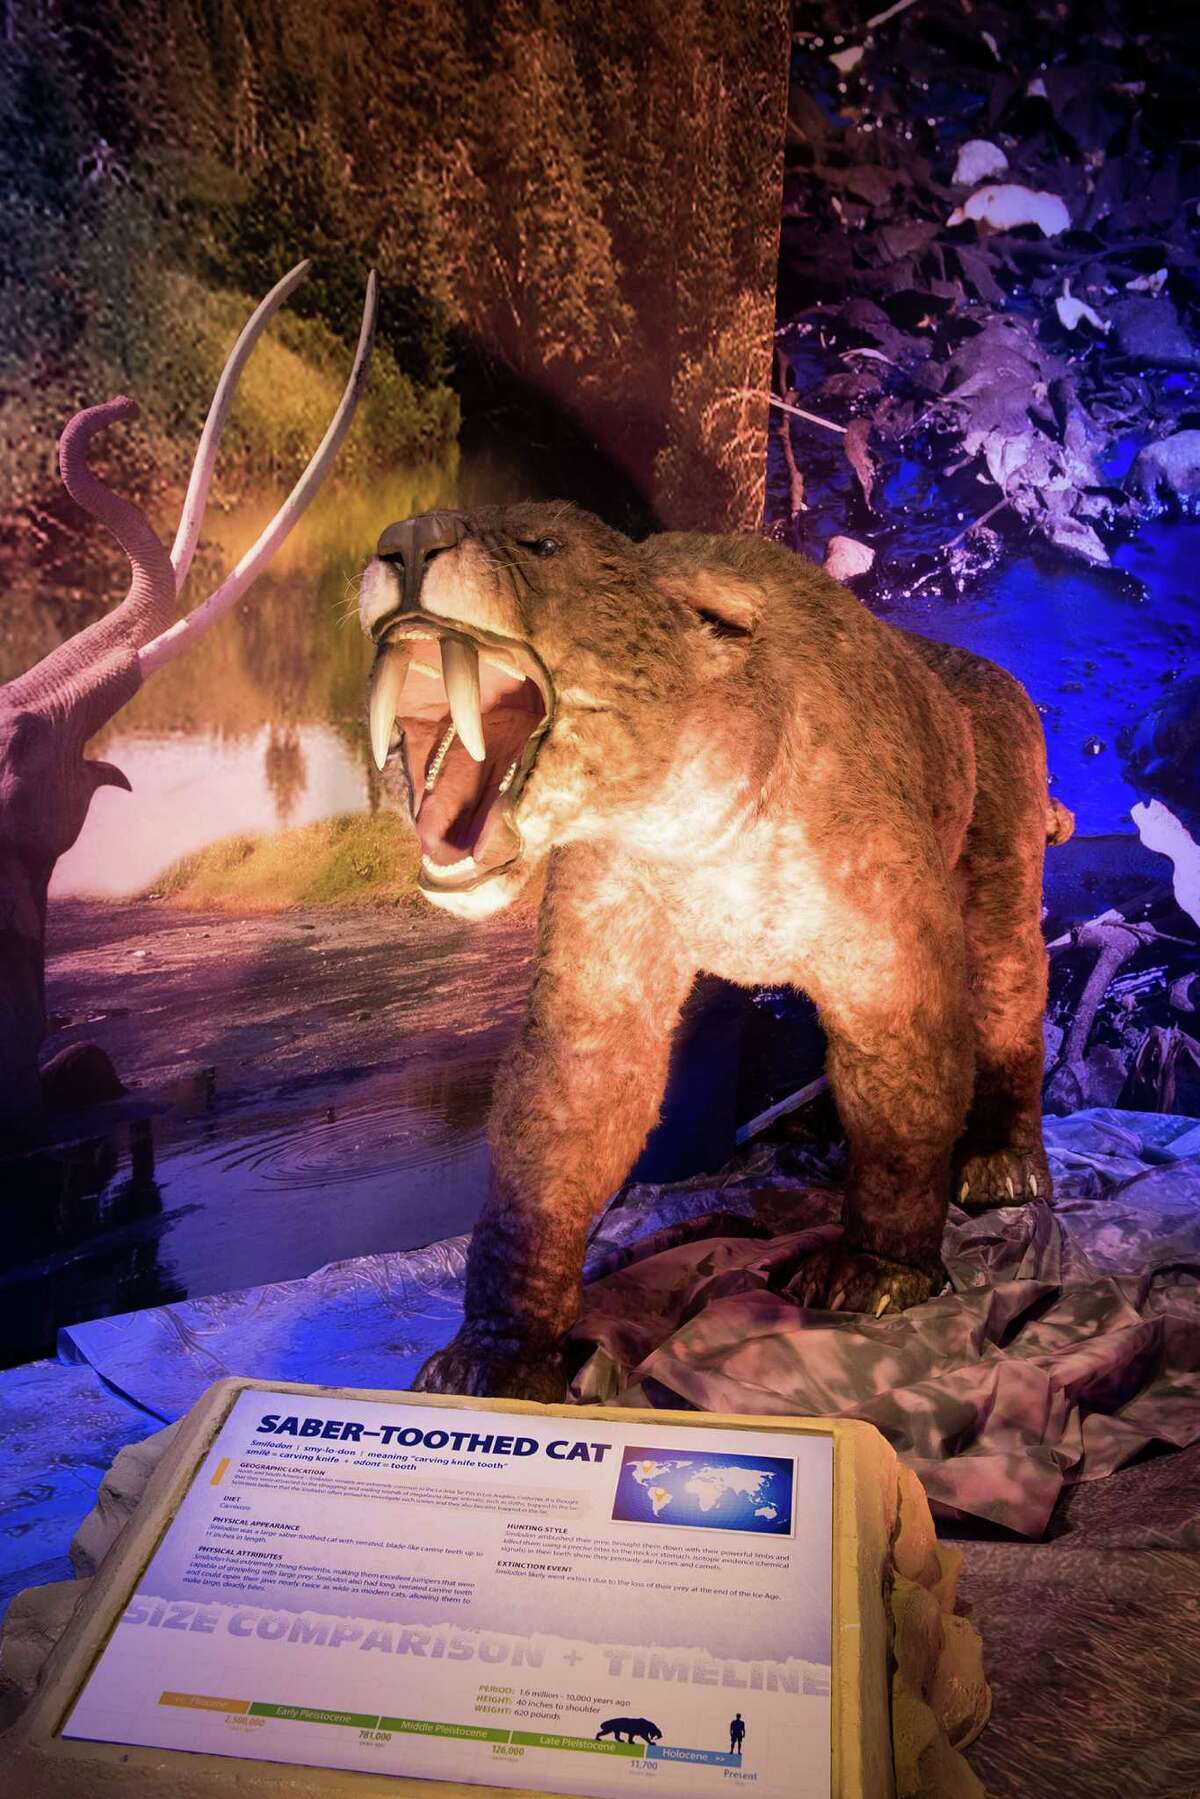 New Ice Age exhibit at the Witte Museum